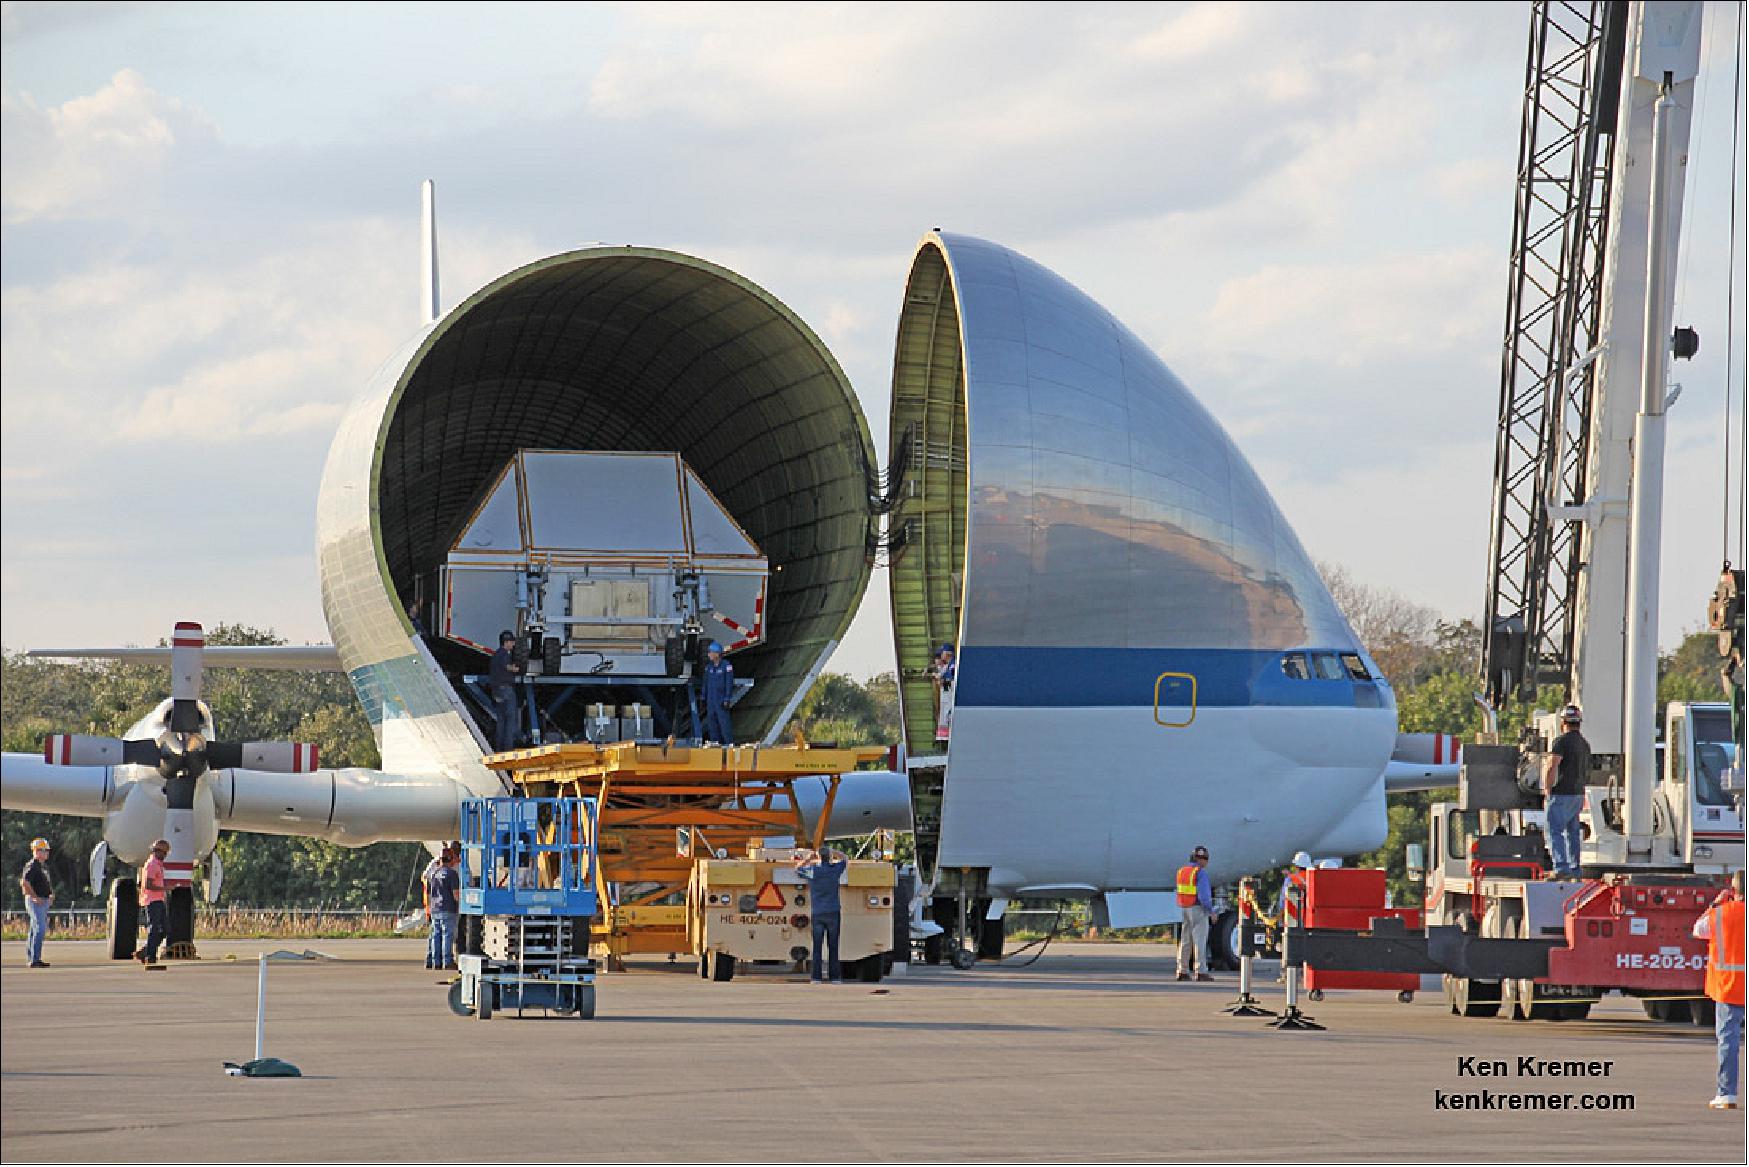 Figure 77: The nose of the Super Guppy aircraft opened to reveal cargo hold carrying the Orion crew module pressure vessel after arrival at KSC (image credit: Ken Kremer)